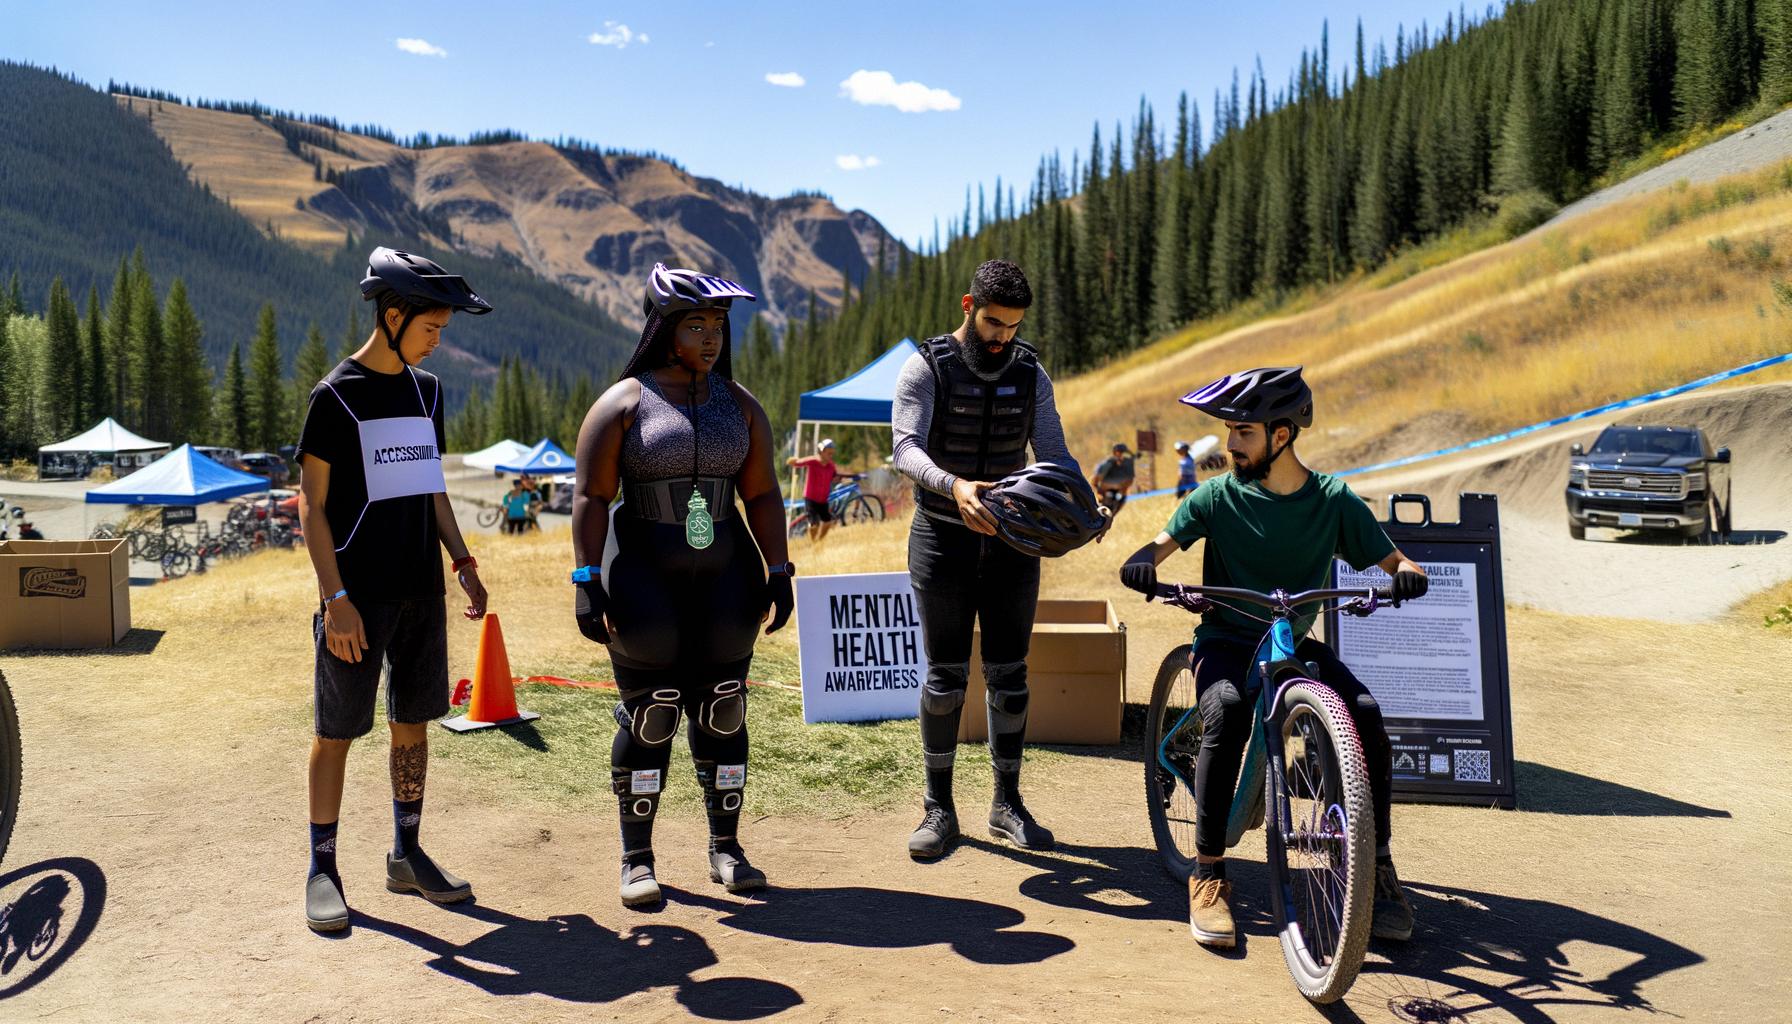 Mountain biking community focuses on mental health, accessibility, and competition